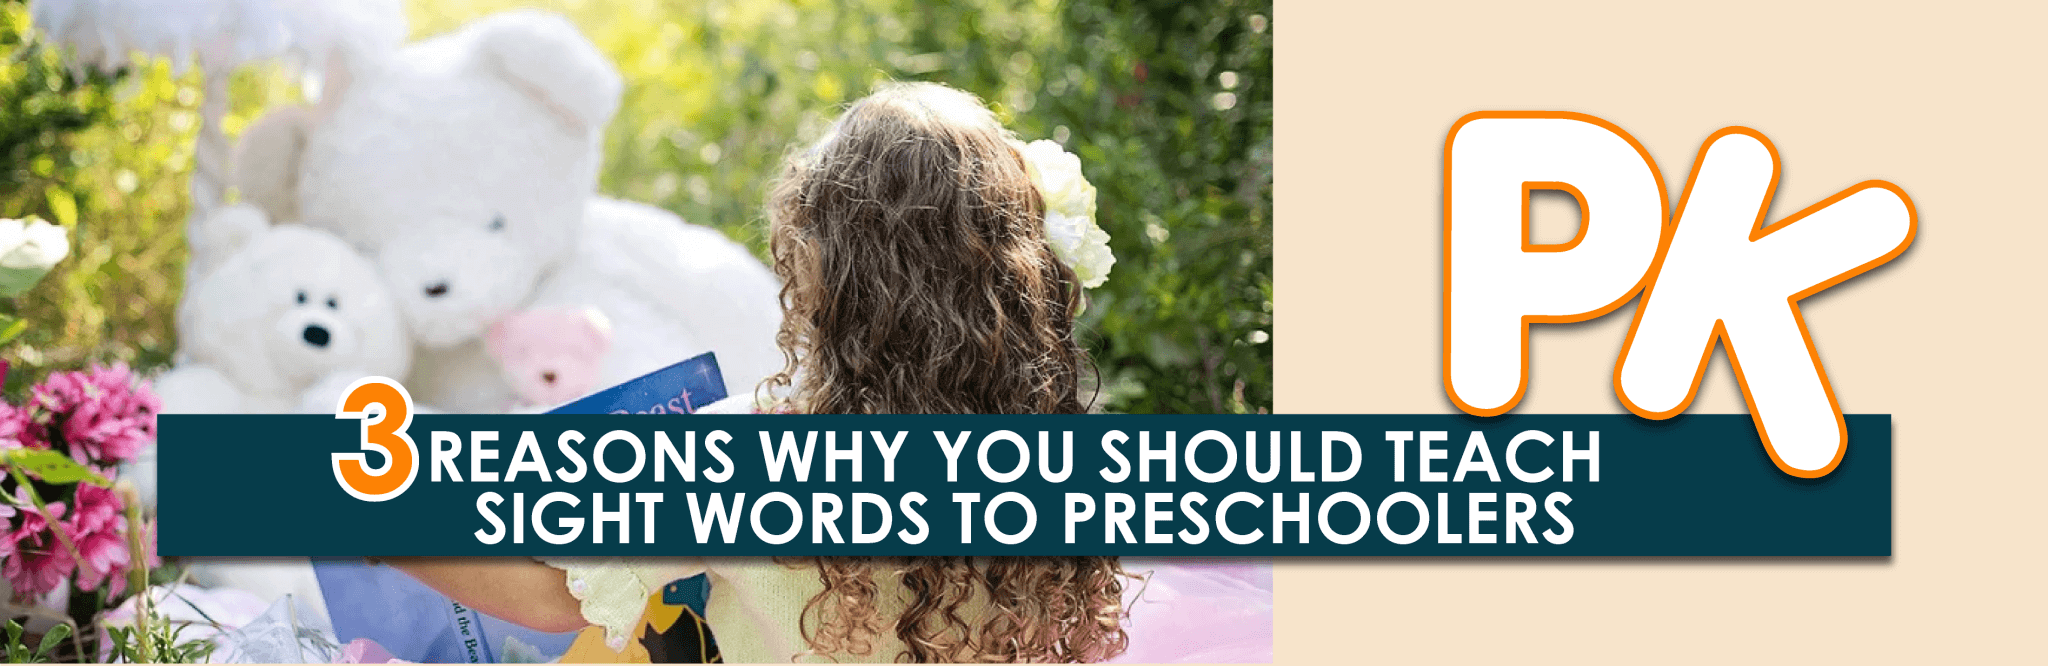 3 Reasons Why You Should Teach Sight Words to Preschoolers (Gasp!)